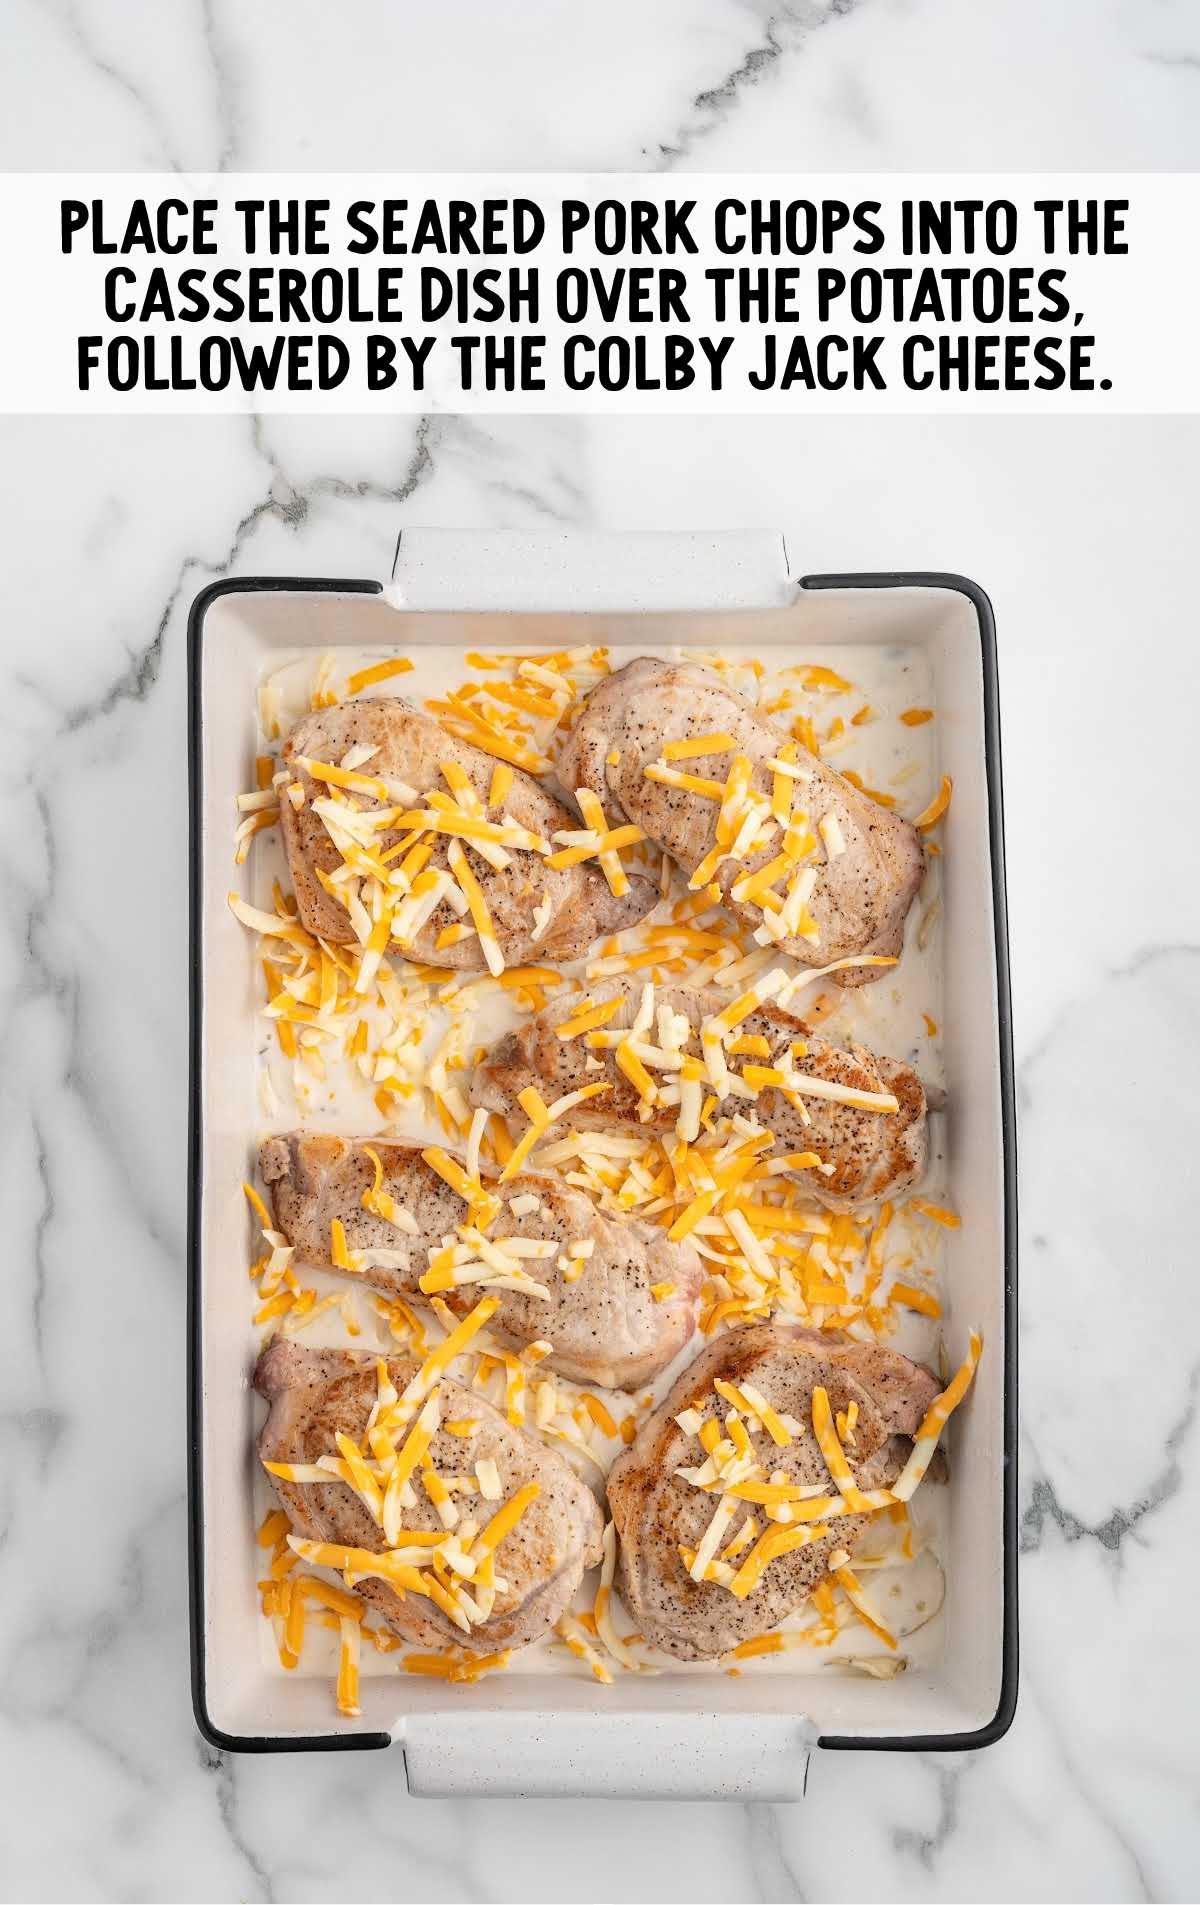 pork shops sprinkled with colby jack cheese in the casserole dish